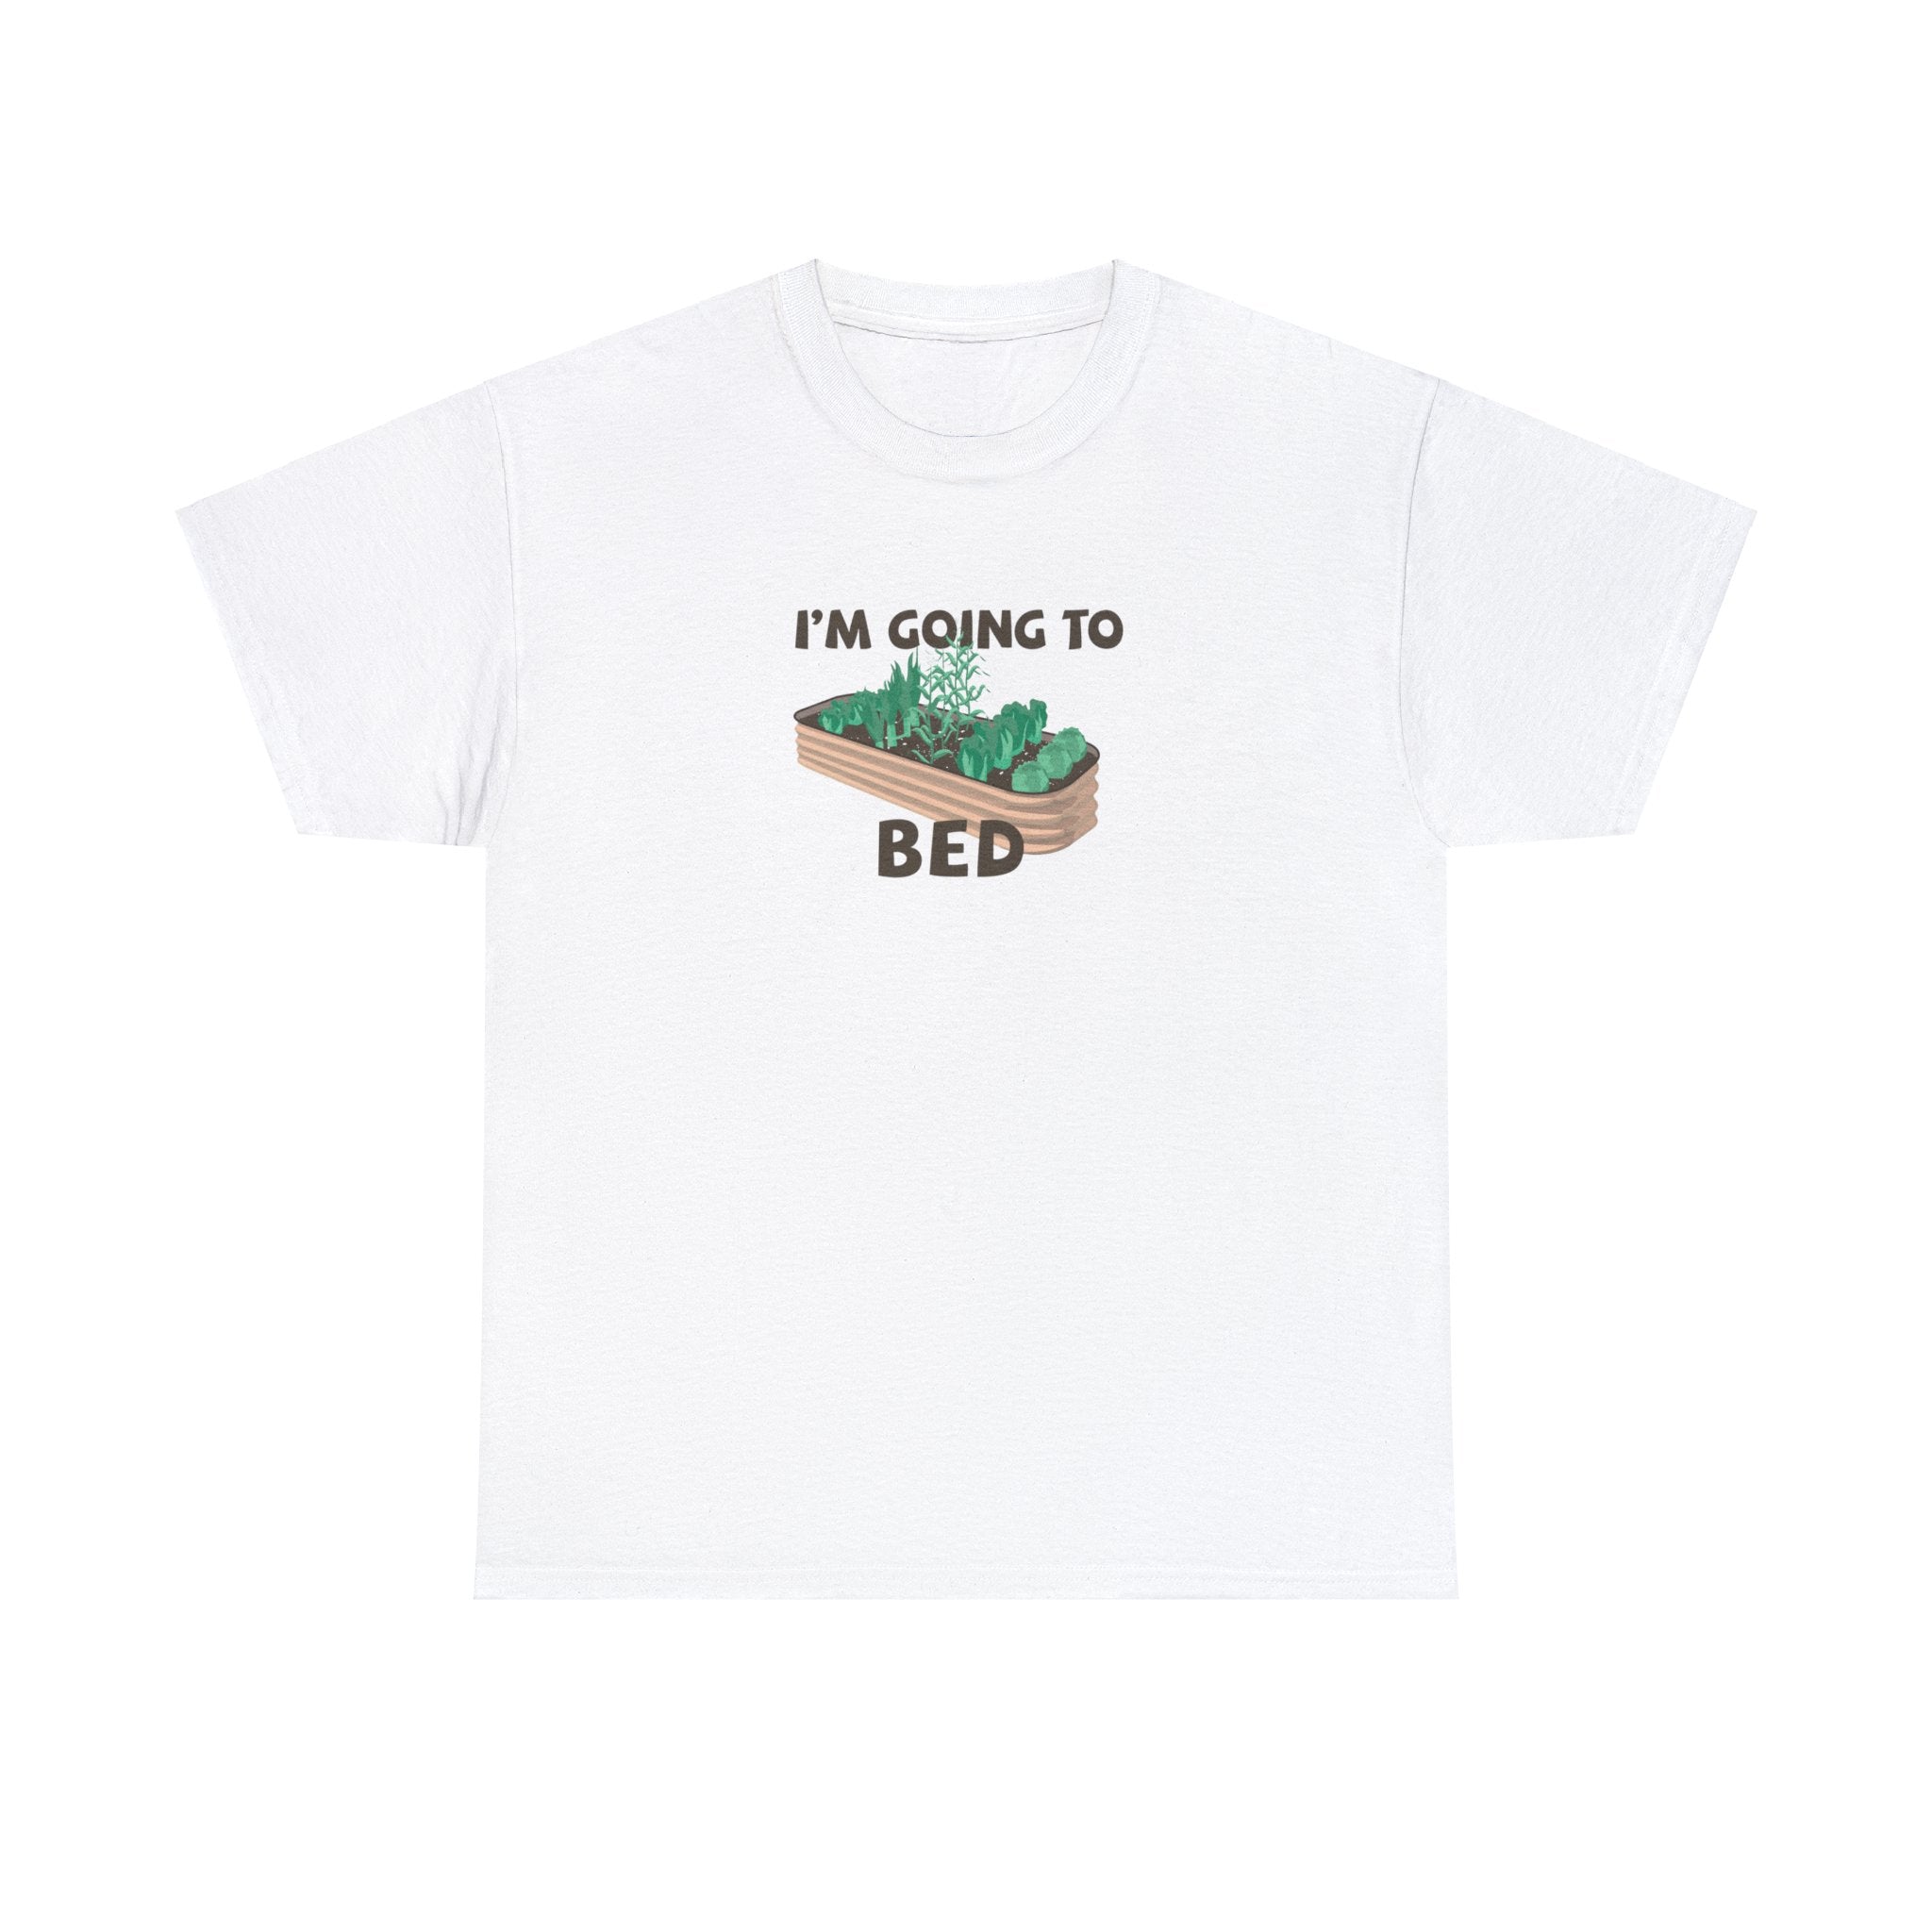 I'm going to bed (metal) T-shirt